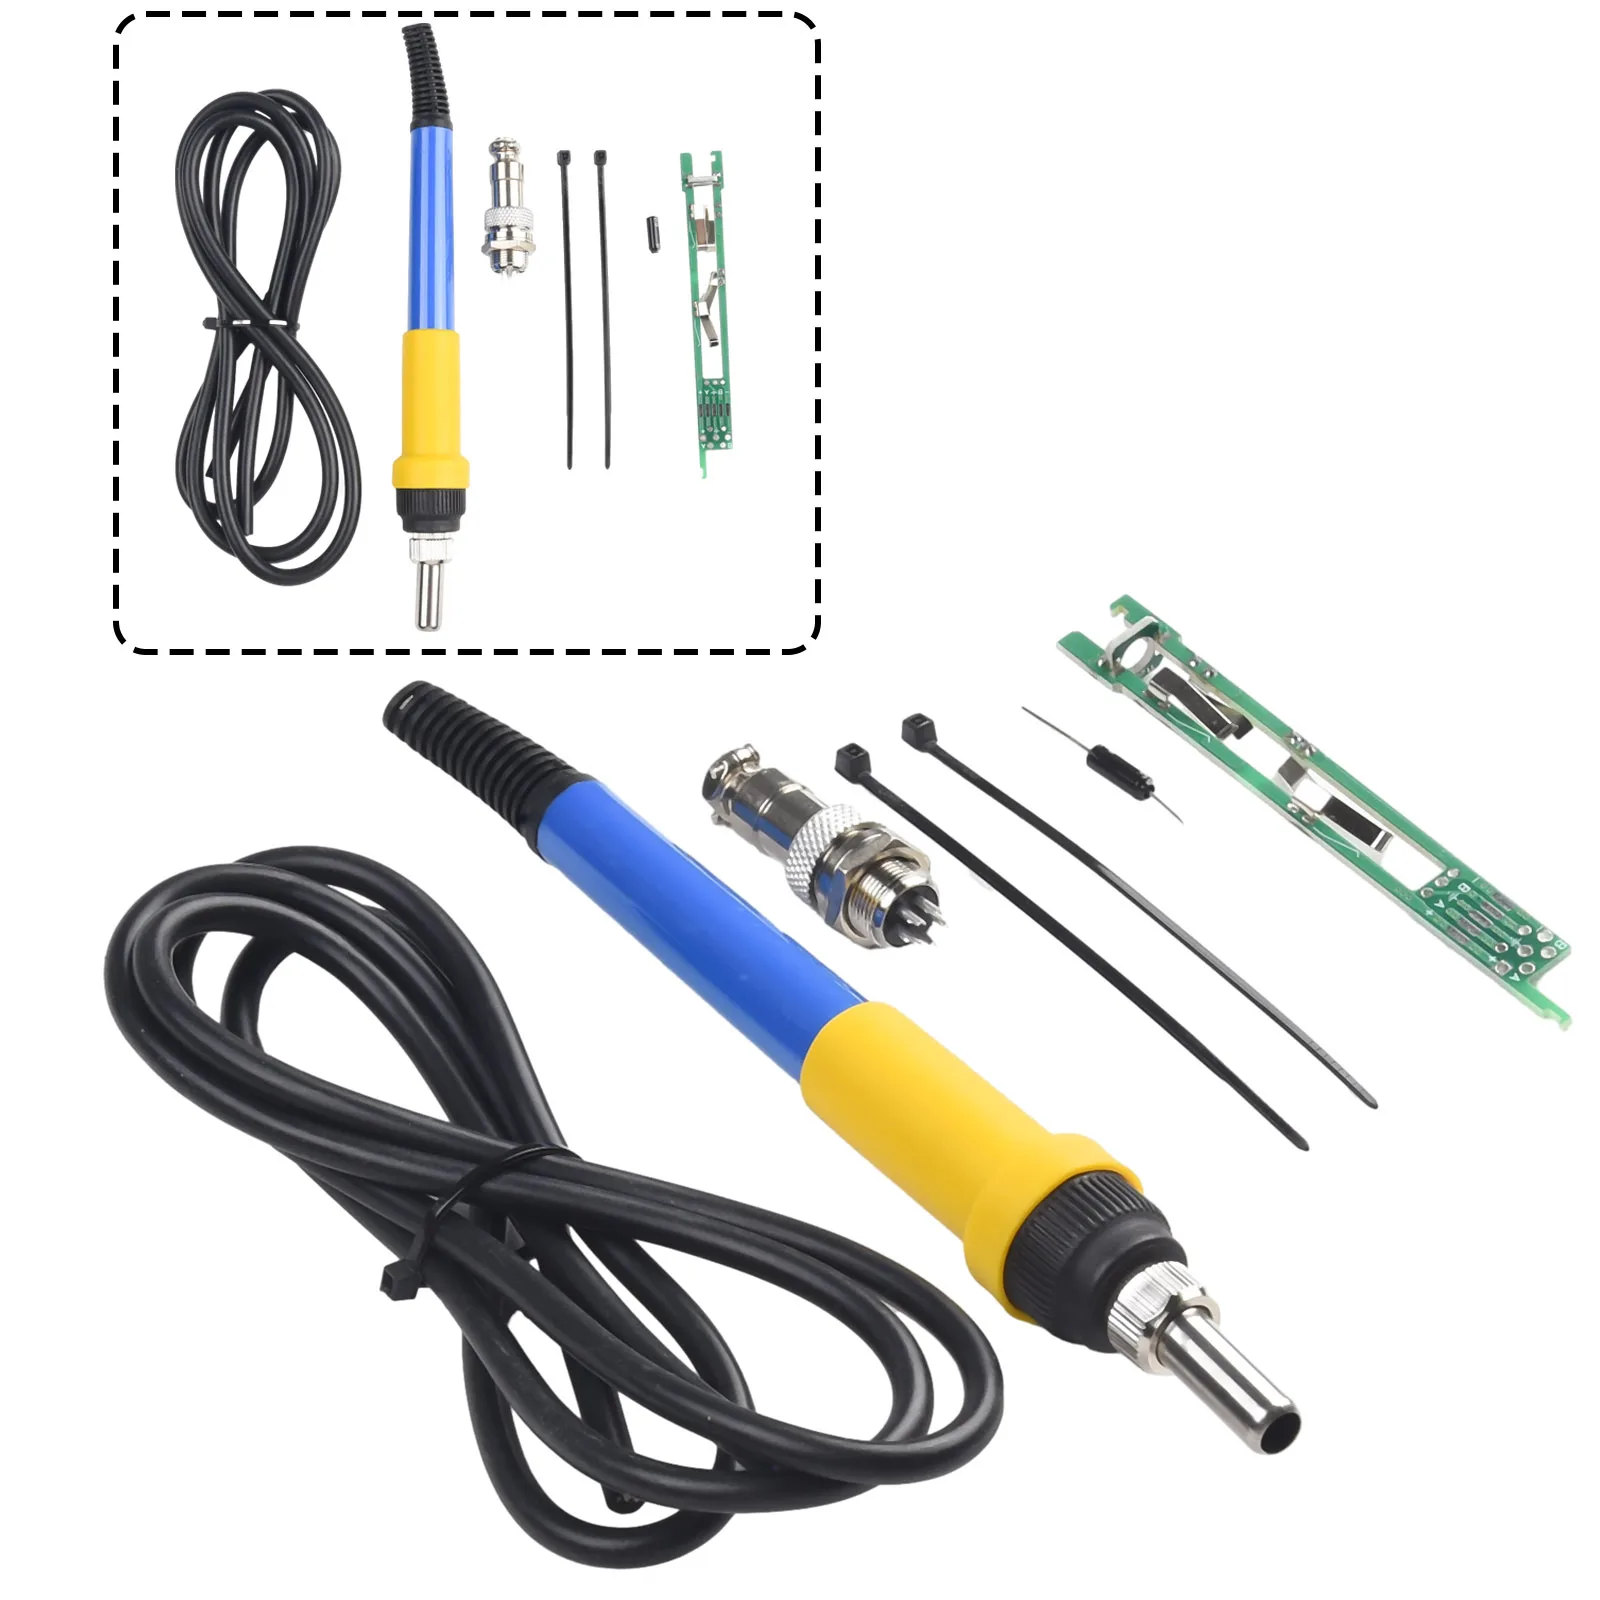 Durable 907 To T12 Handle Soldering Handle Soldering Iron Kit For V2.1S STM32 OLED Digital Welding Hand Tools Accessories